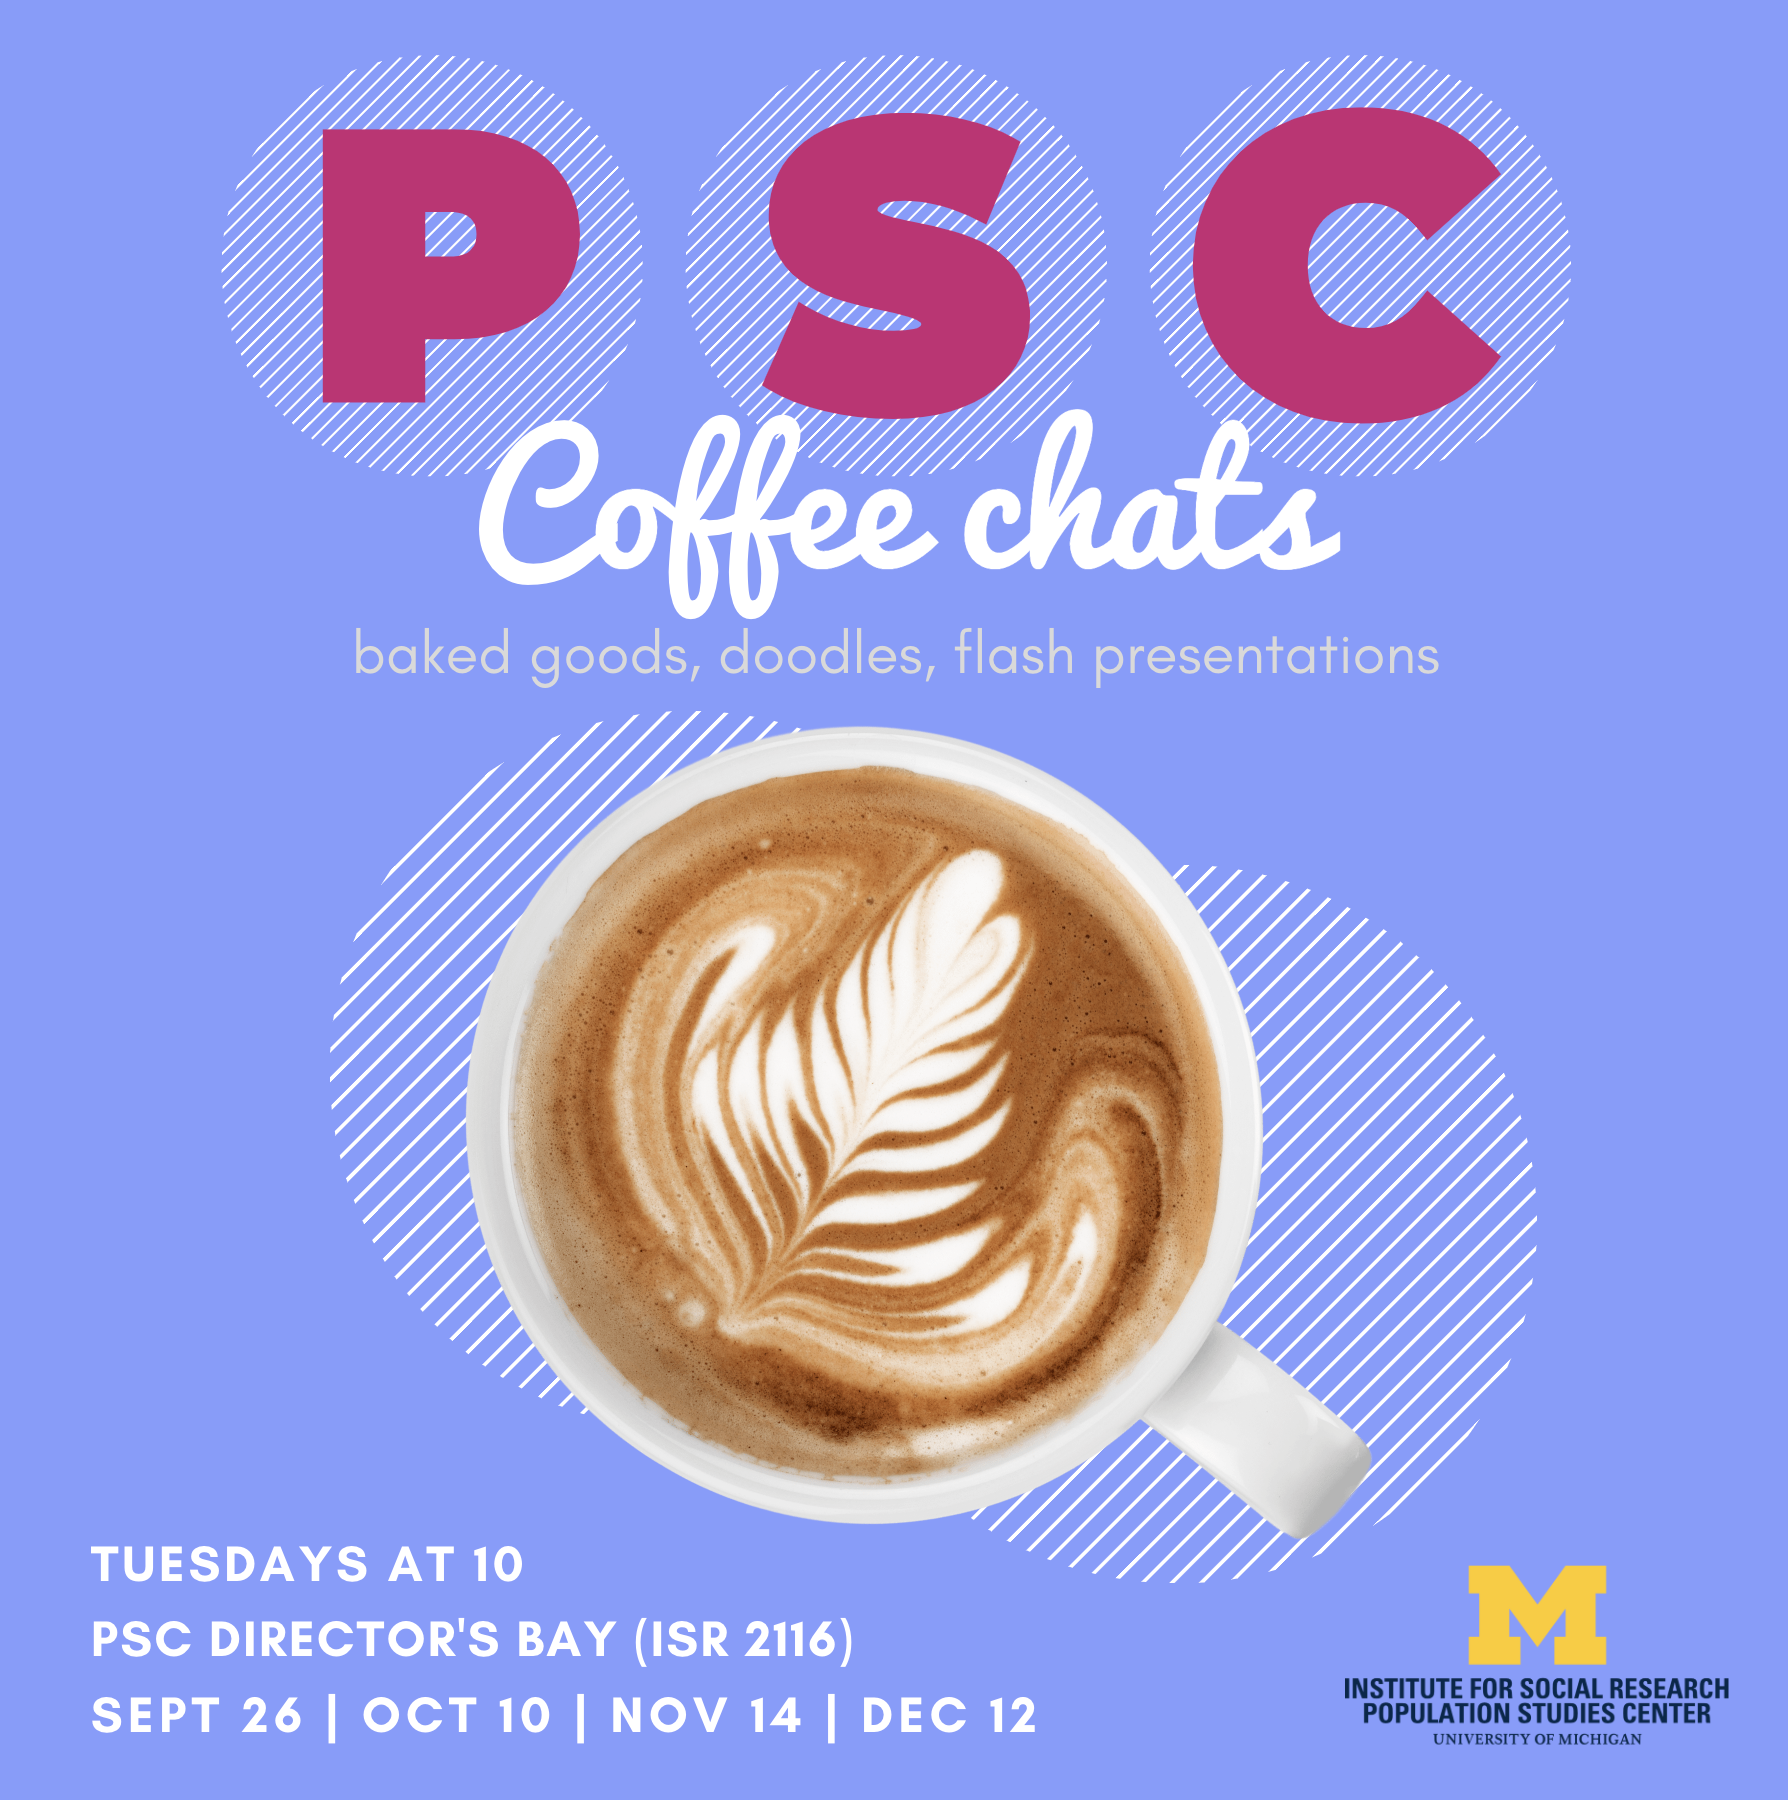 Fall 2023 PSC Coffee Chats will be Sept. 26, Oct. 10, Nov. 14 and Dec. 12 in the PSC DIrector's Bay at 10 am